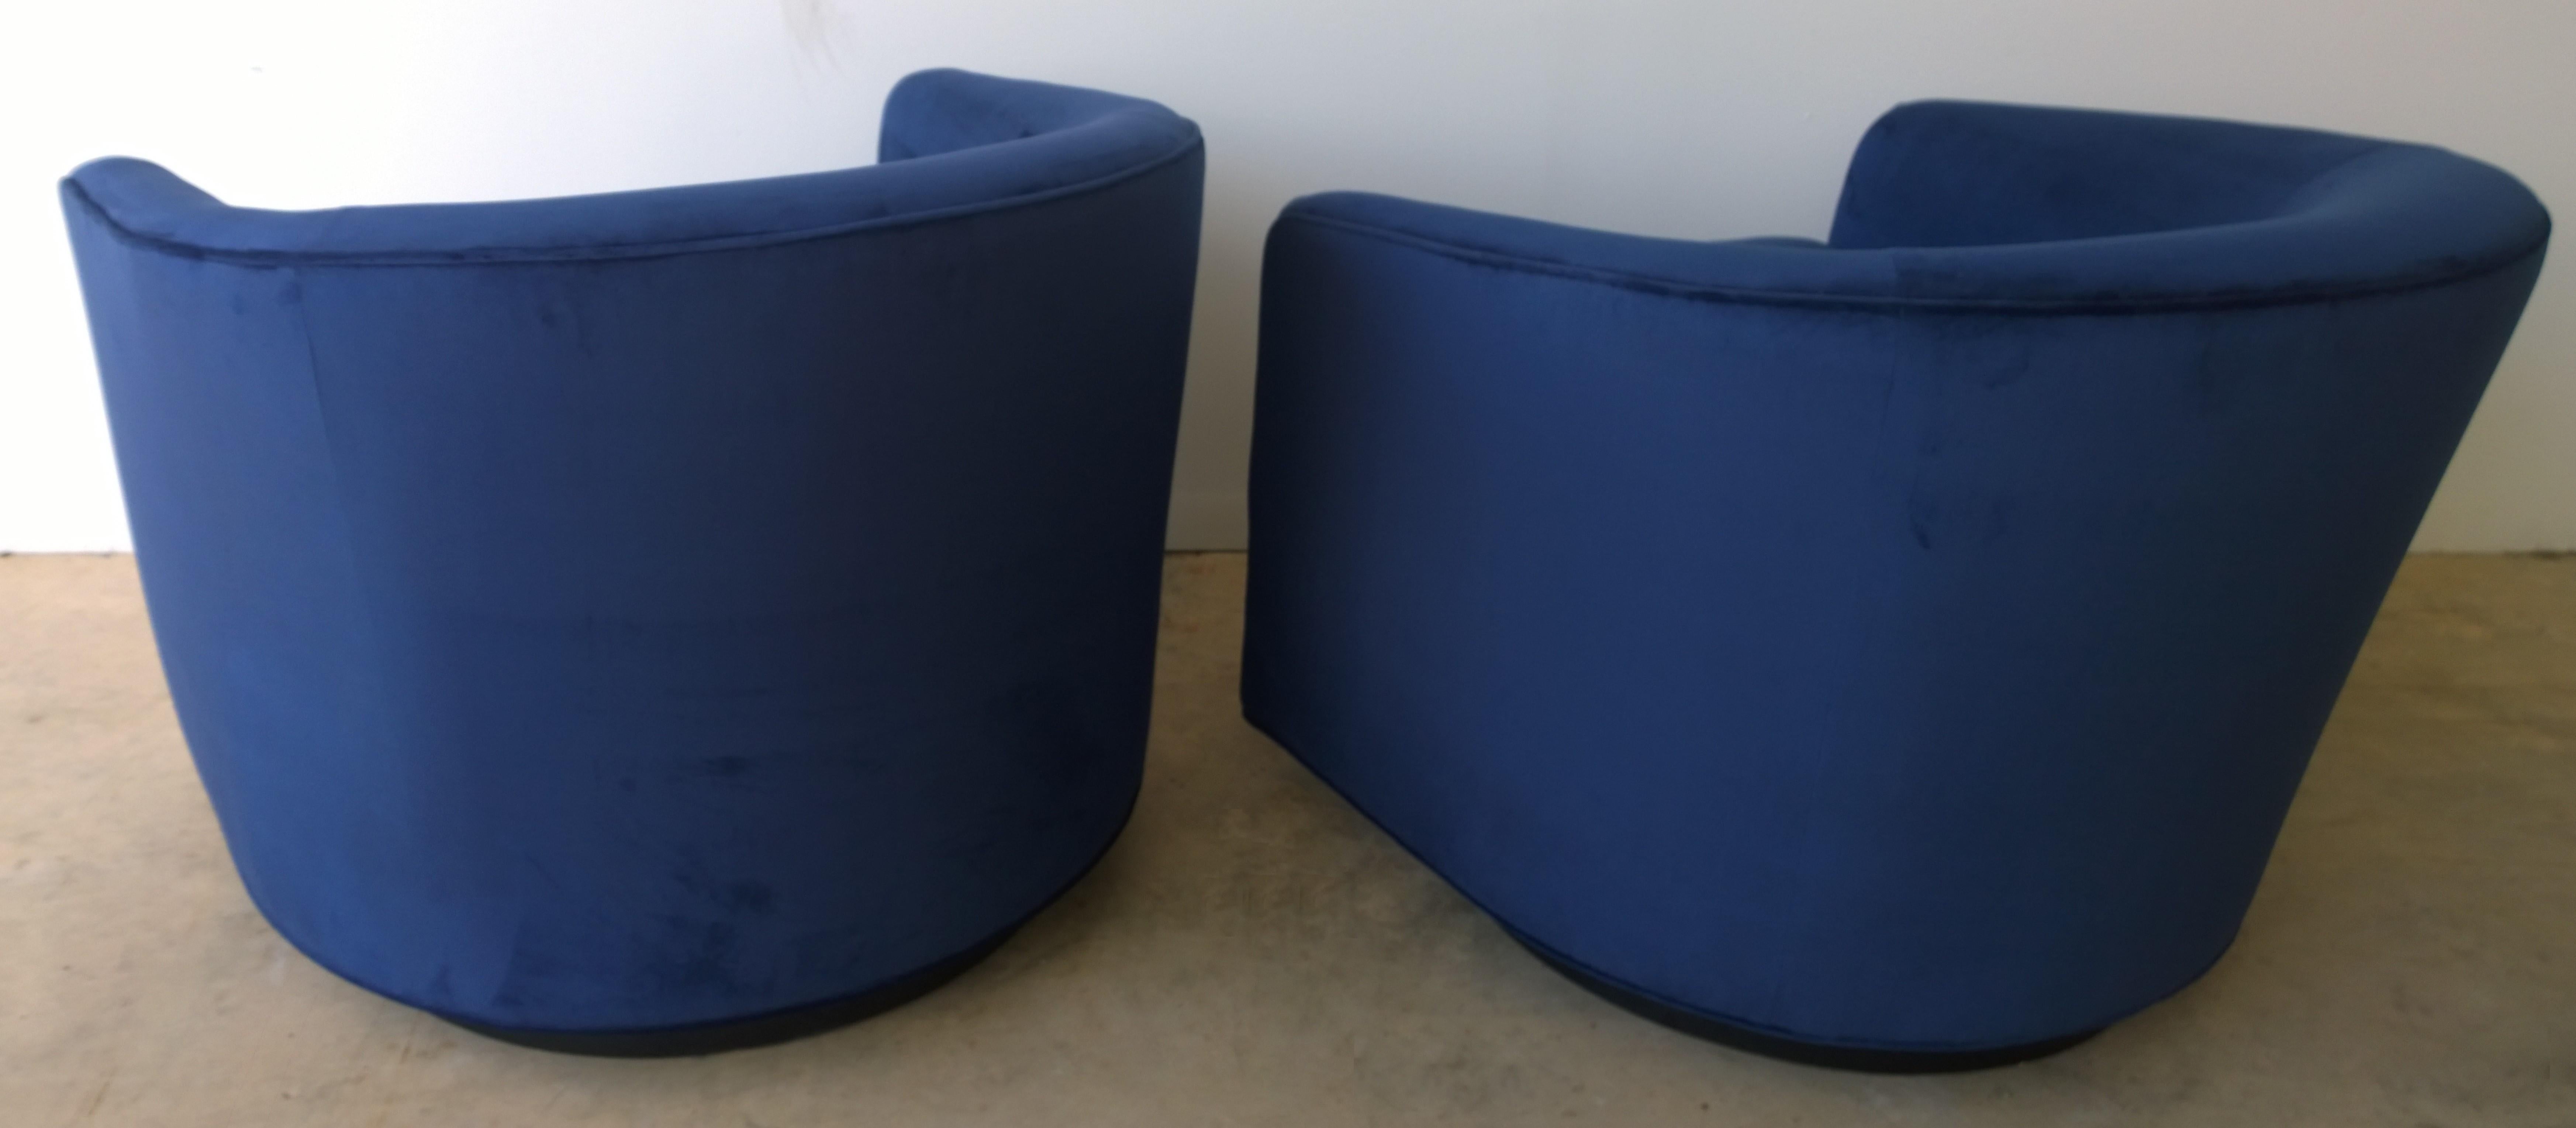 Pair of Baughman Style New Blue Cotton Velvet Swivel Chairs w/ Ebony Wood Bases For Sale 2